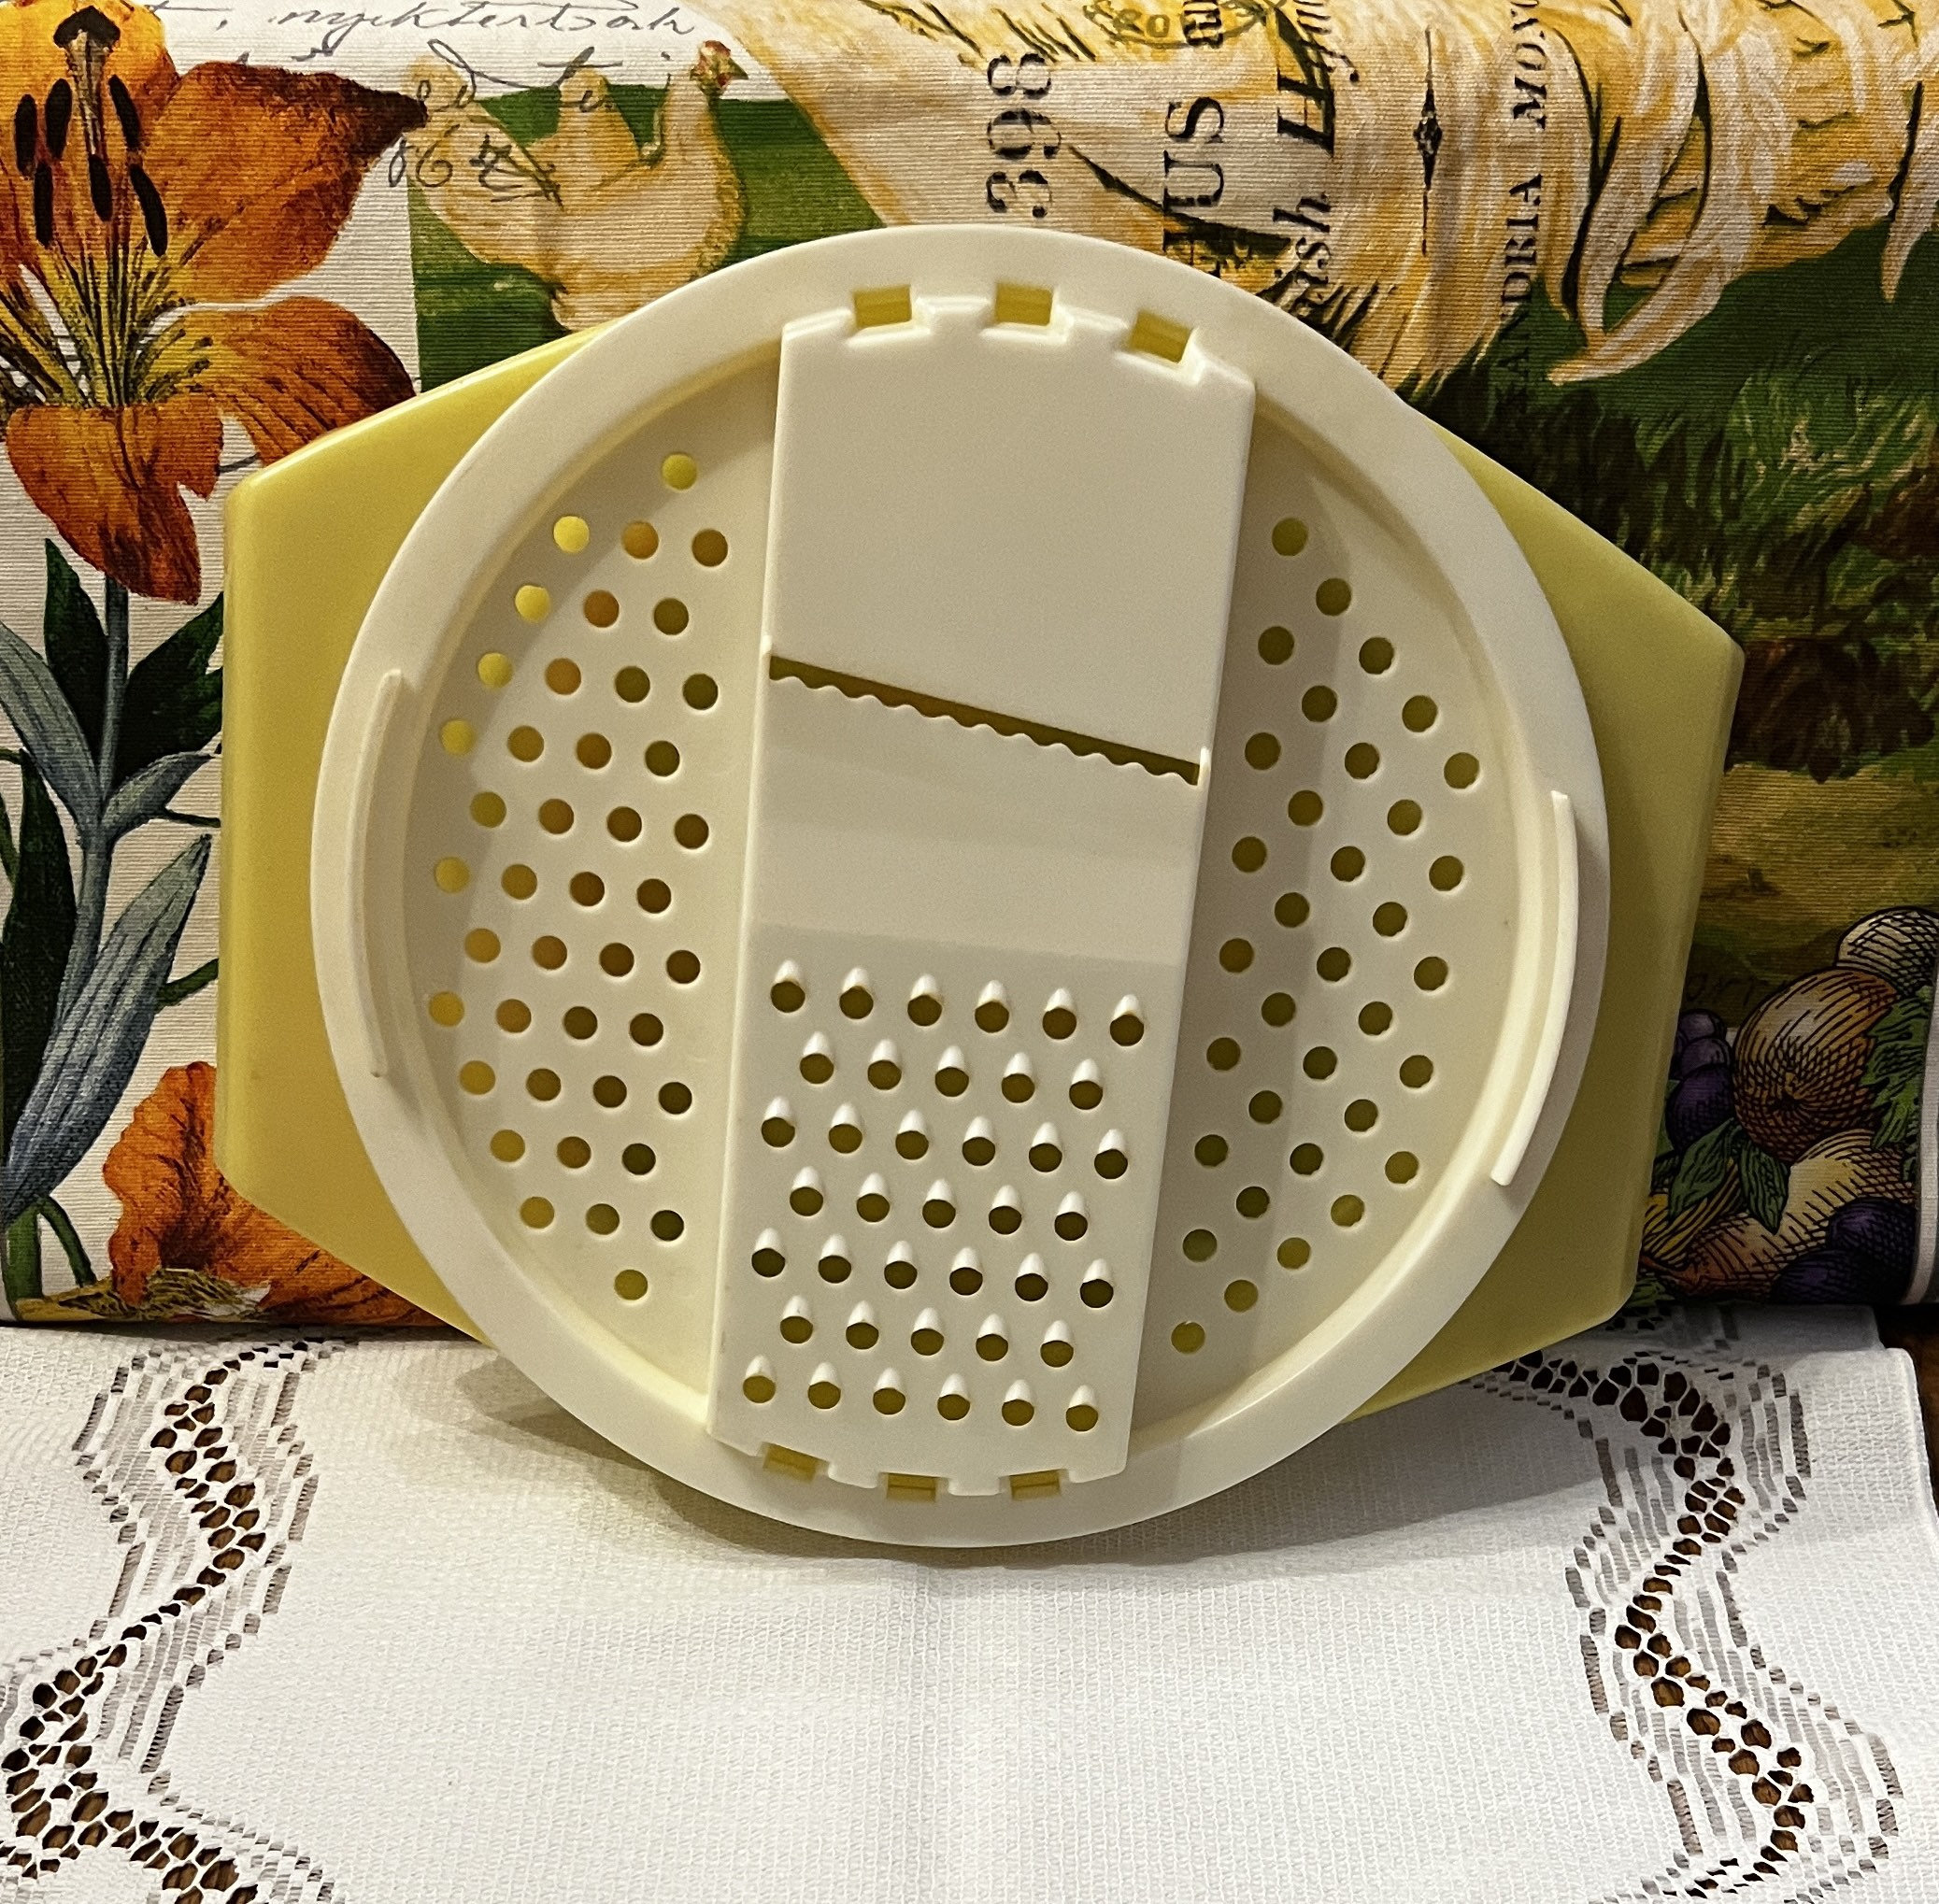 Miniature Tupperware Cheese Grater Vintage Collection – Miniature Cusina